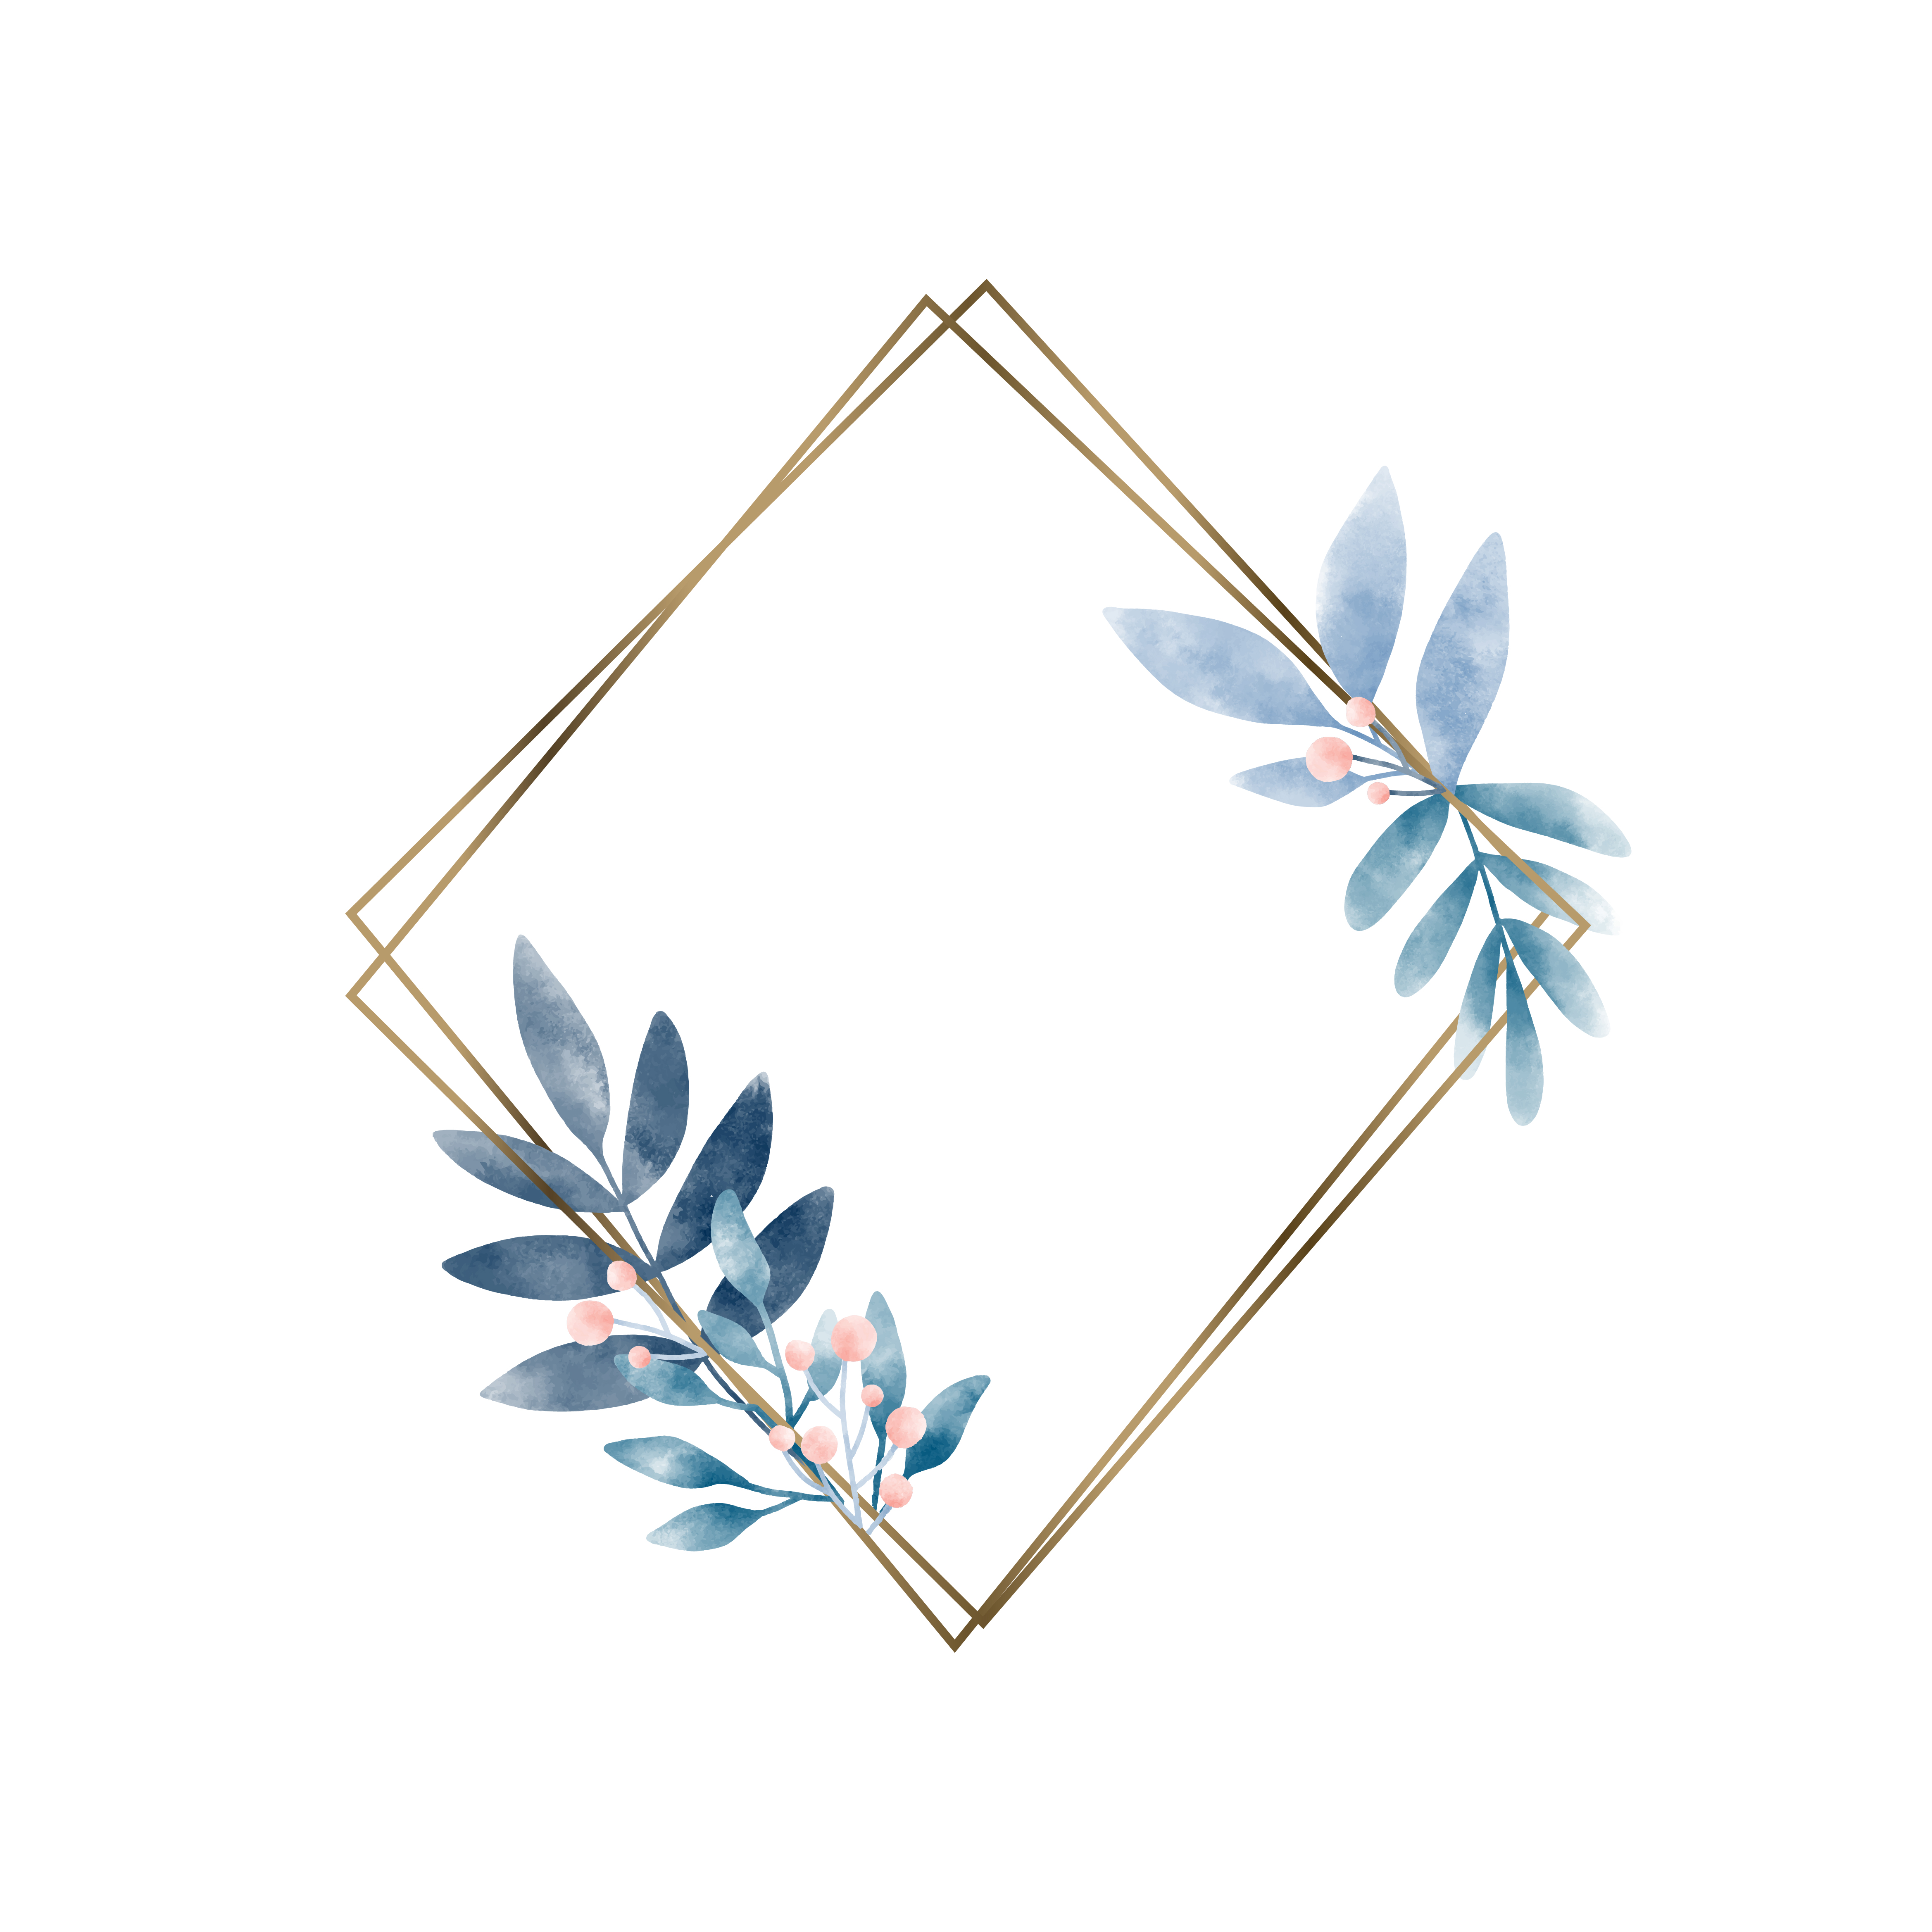 Download Geometric frame with leaves vector - Download Free Vectors ...